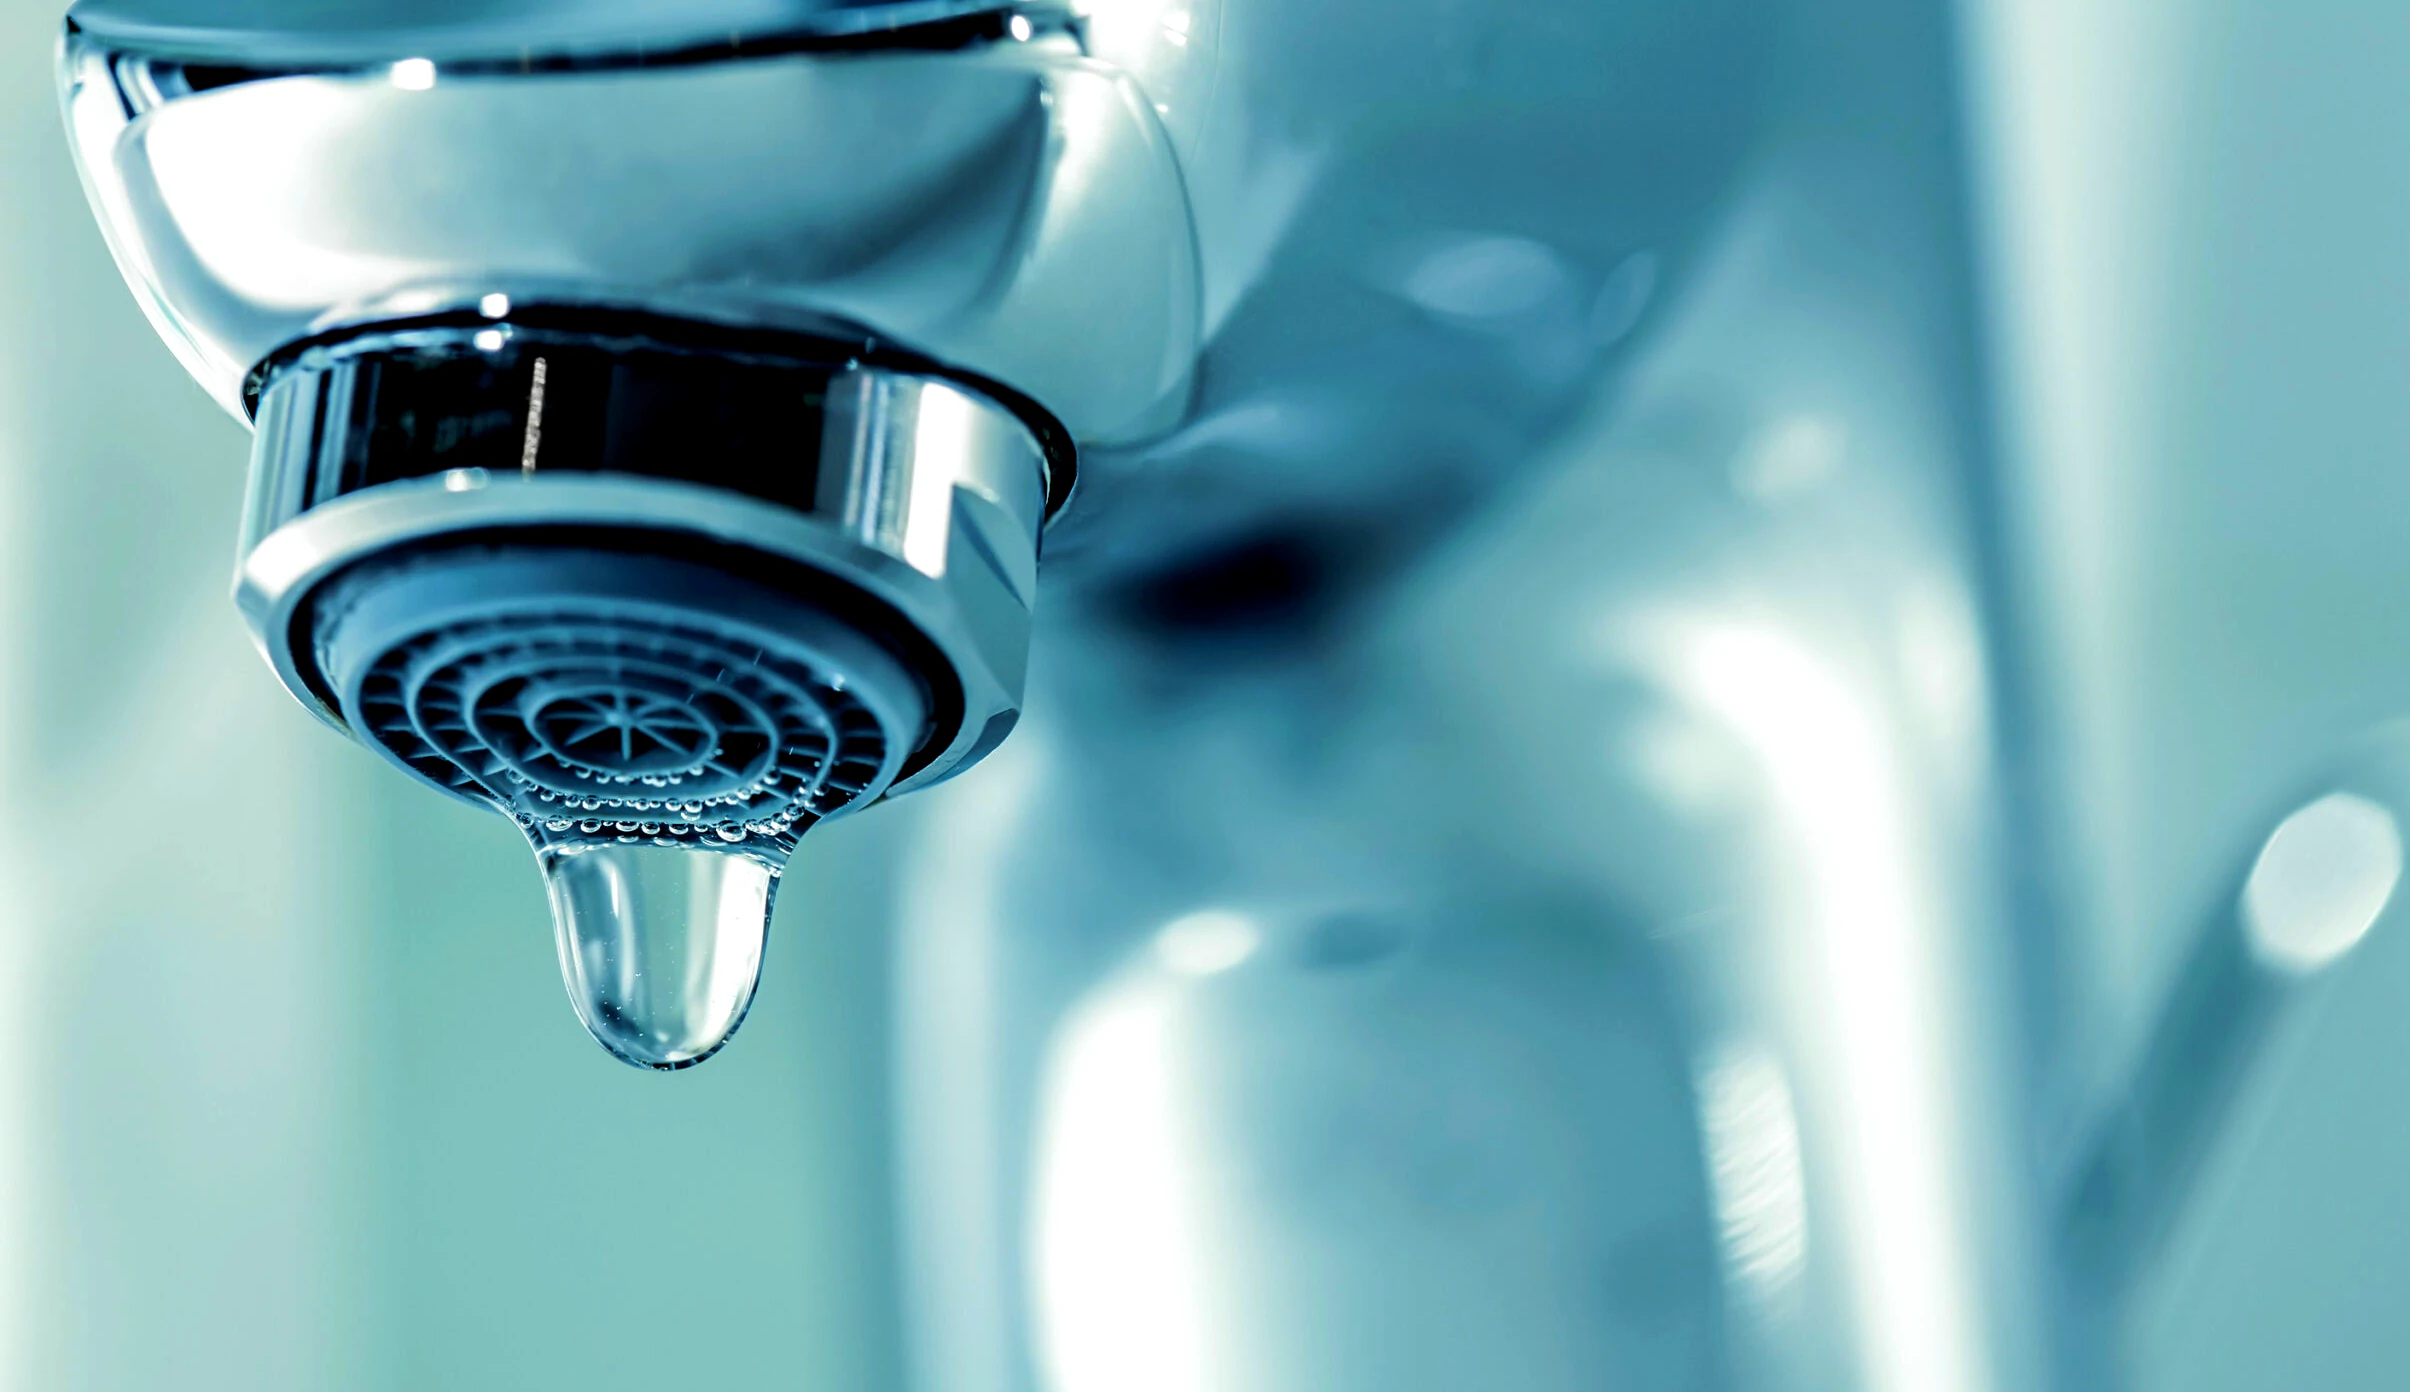 How to Fix a Dripping Bathtub Faucet